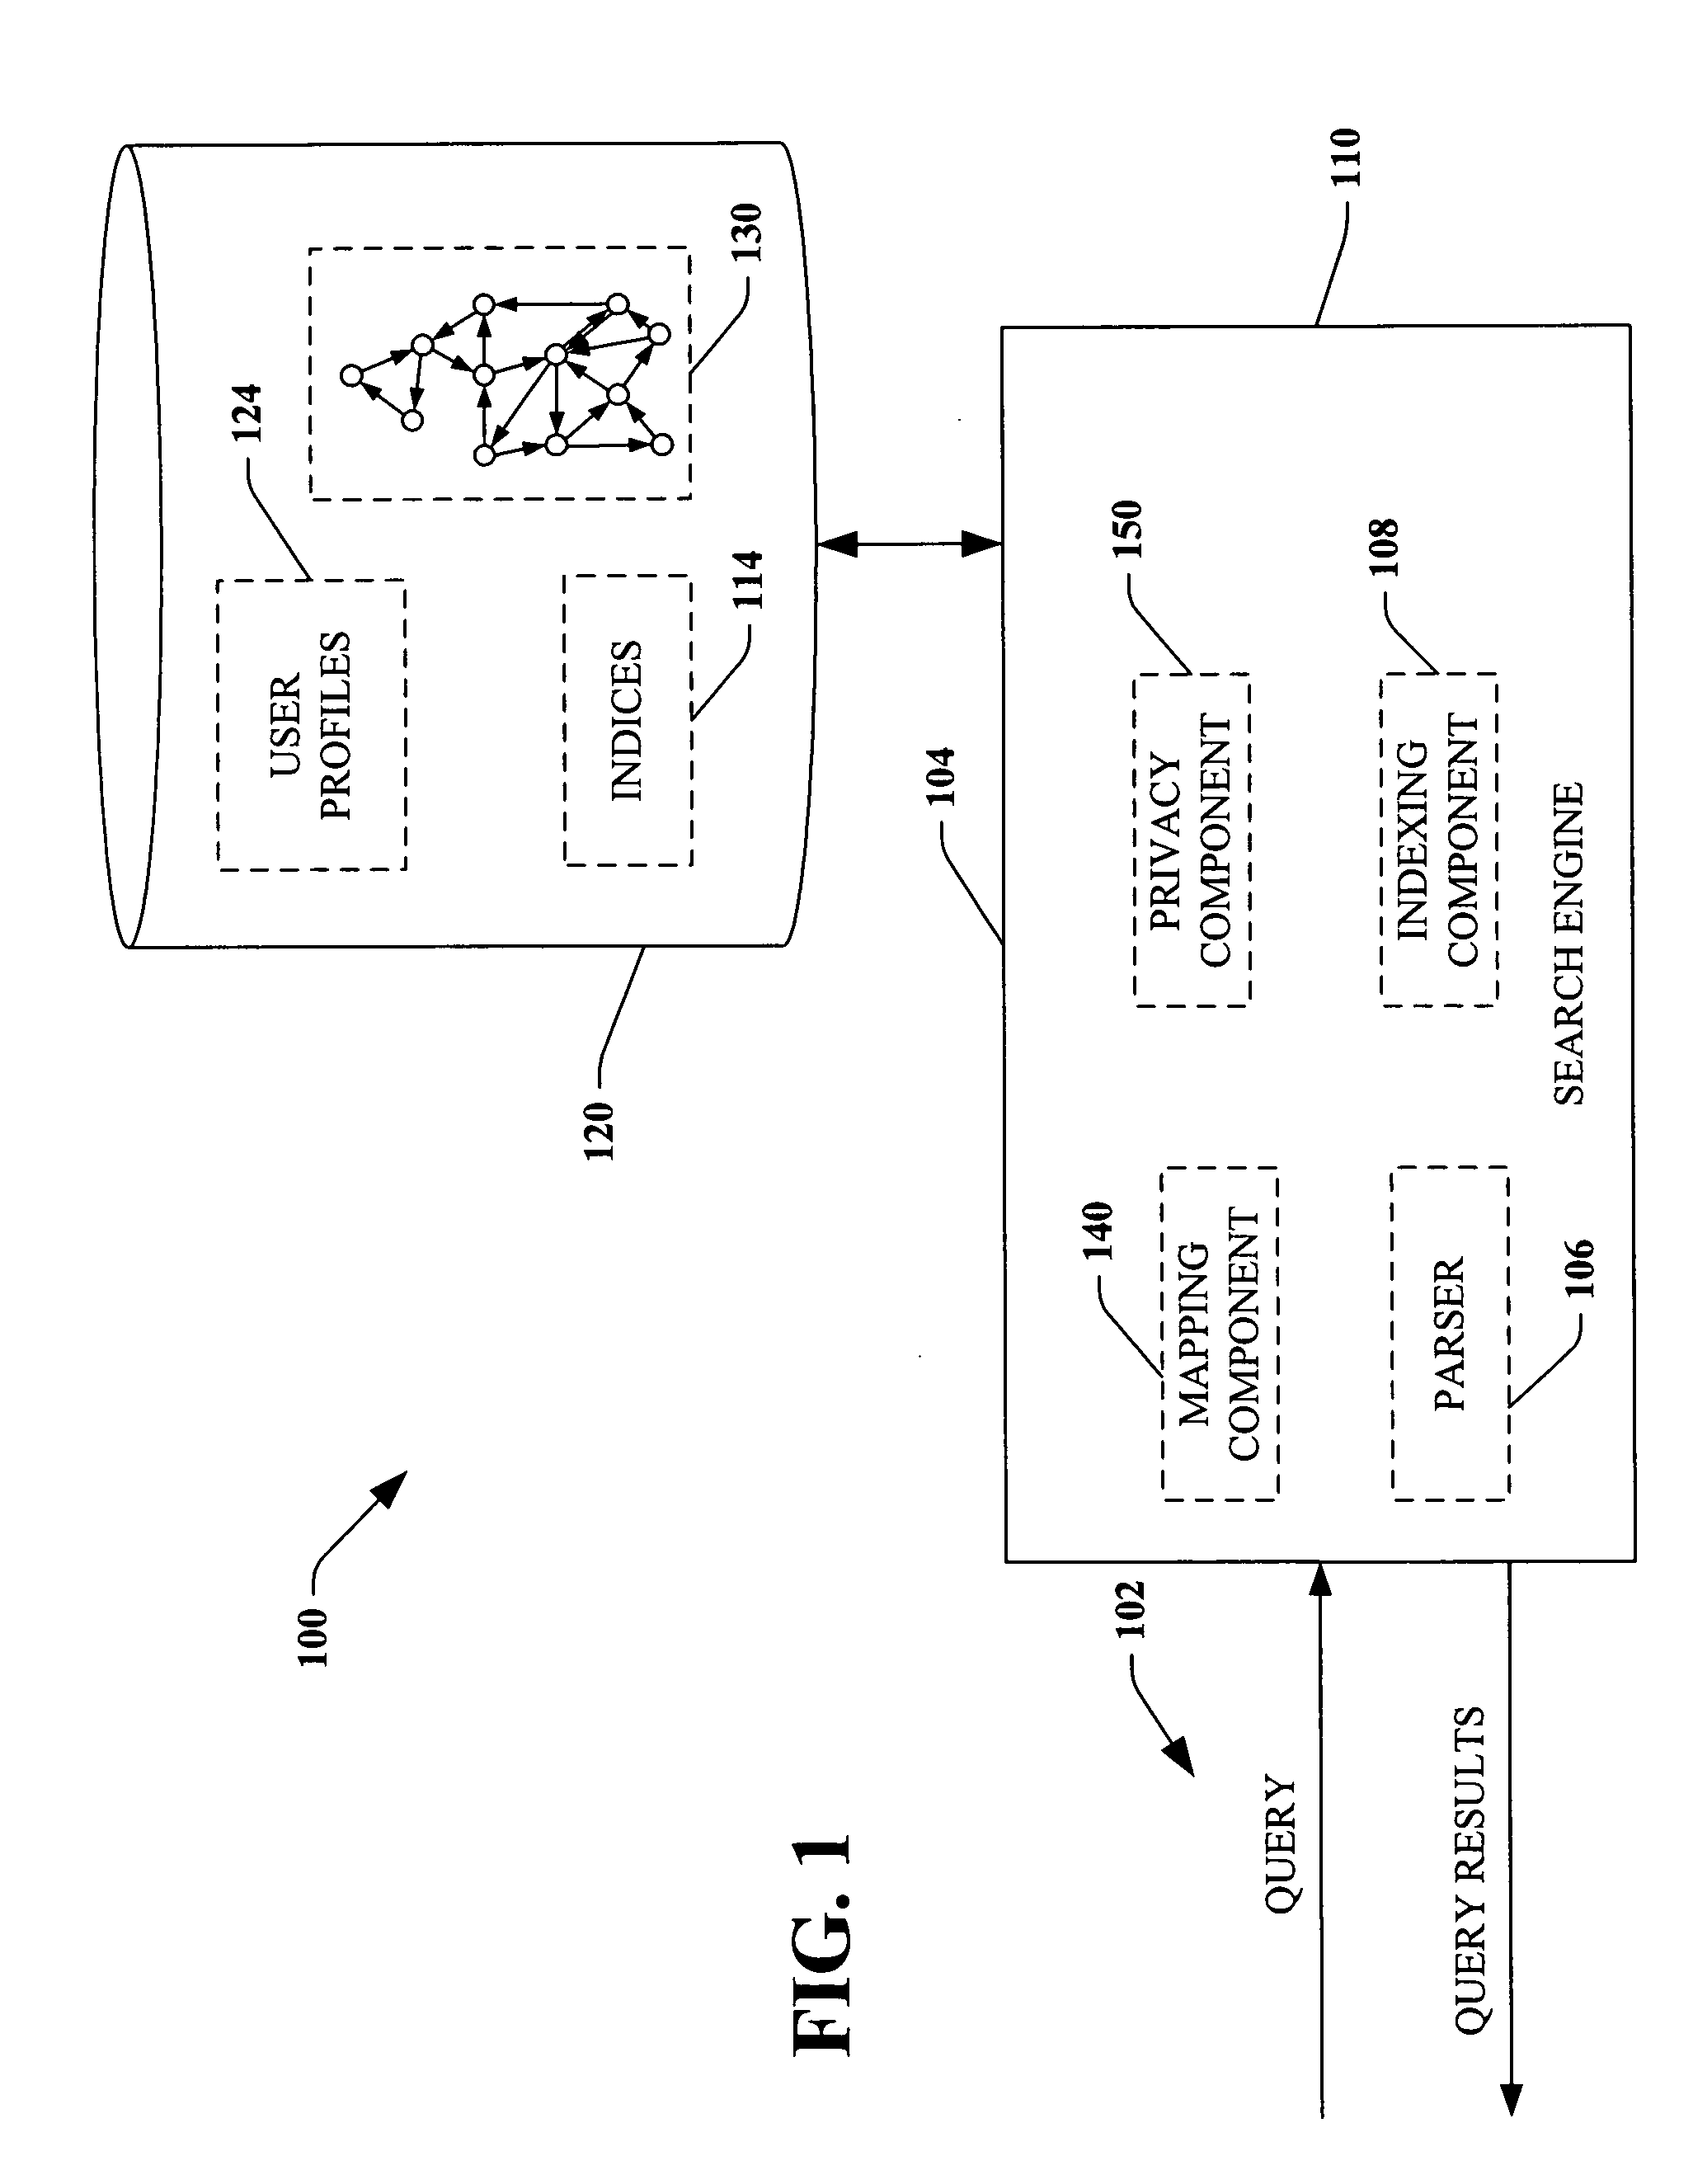 System and method for employing social networks for information discovery